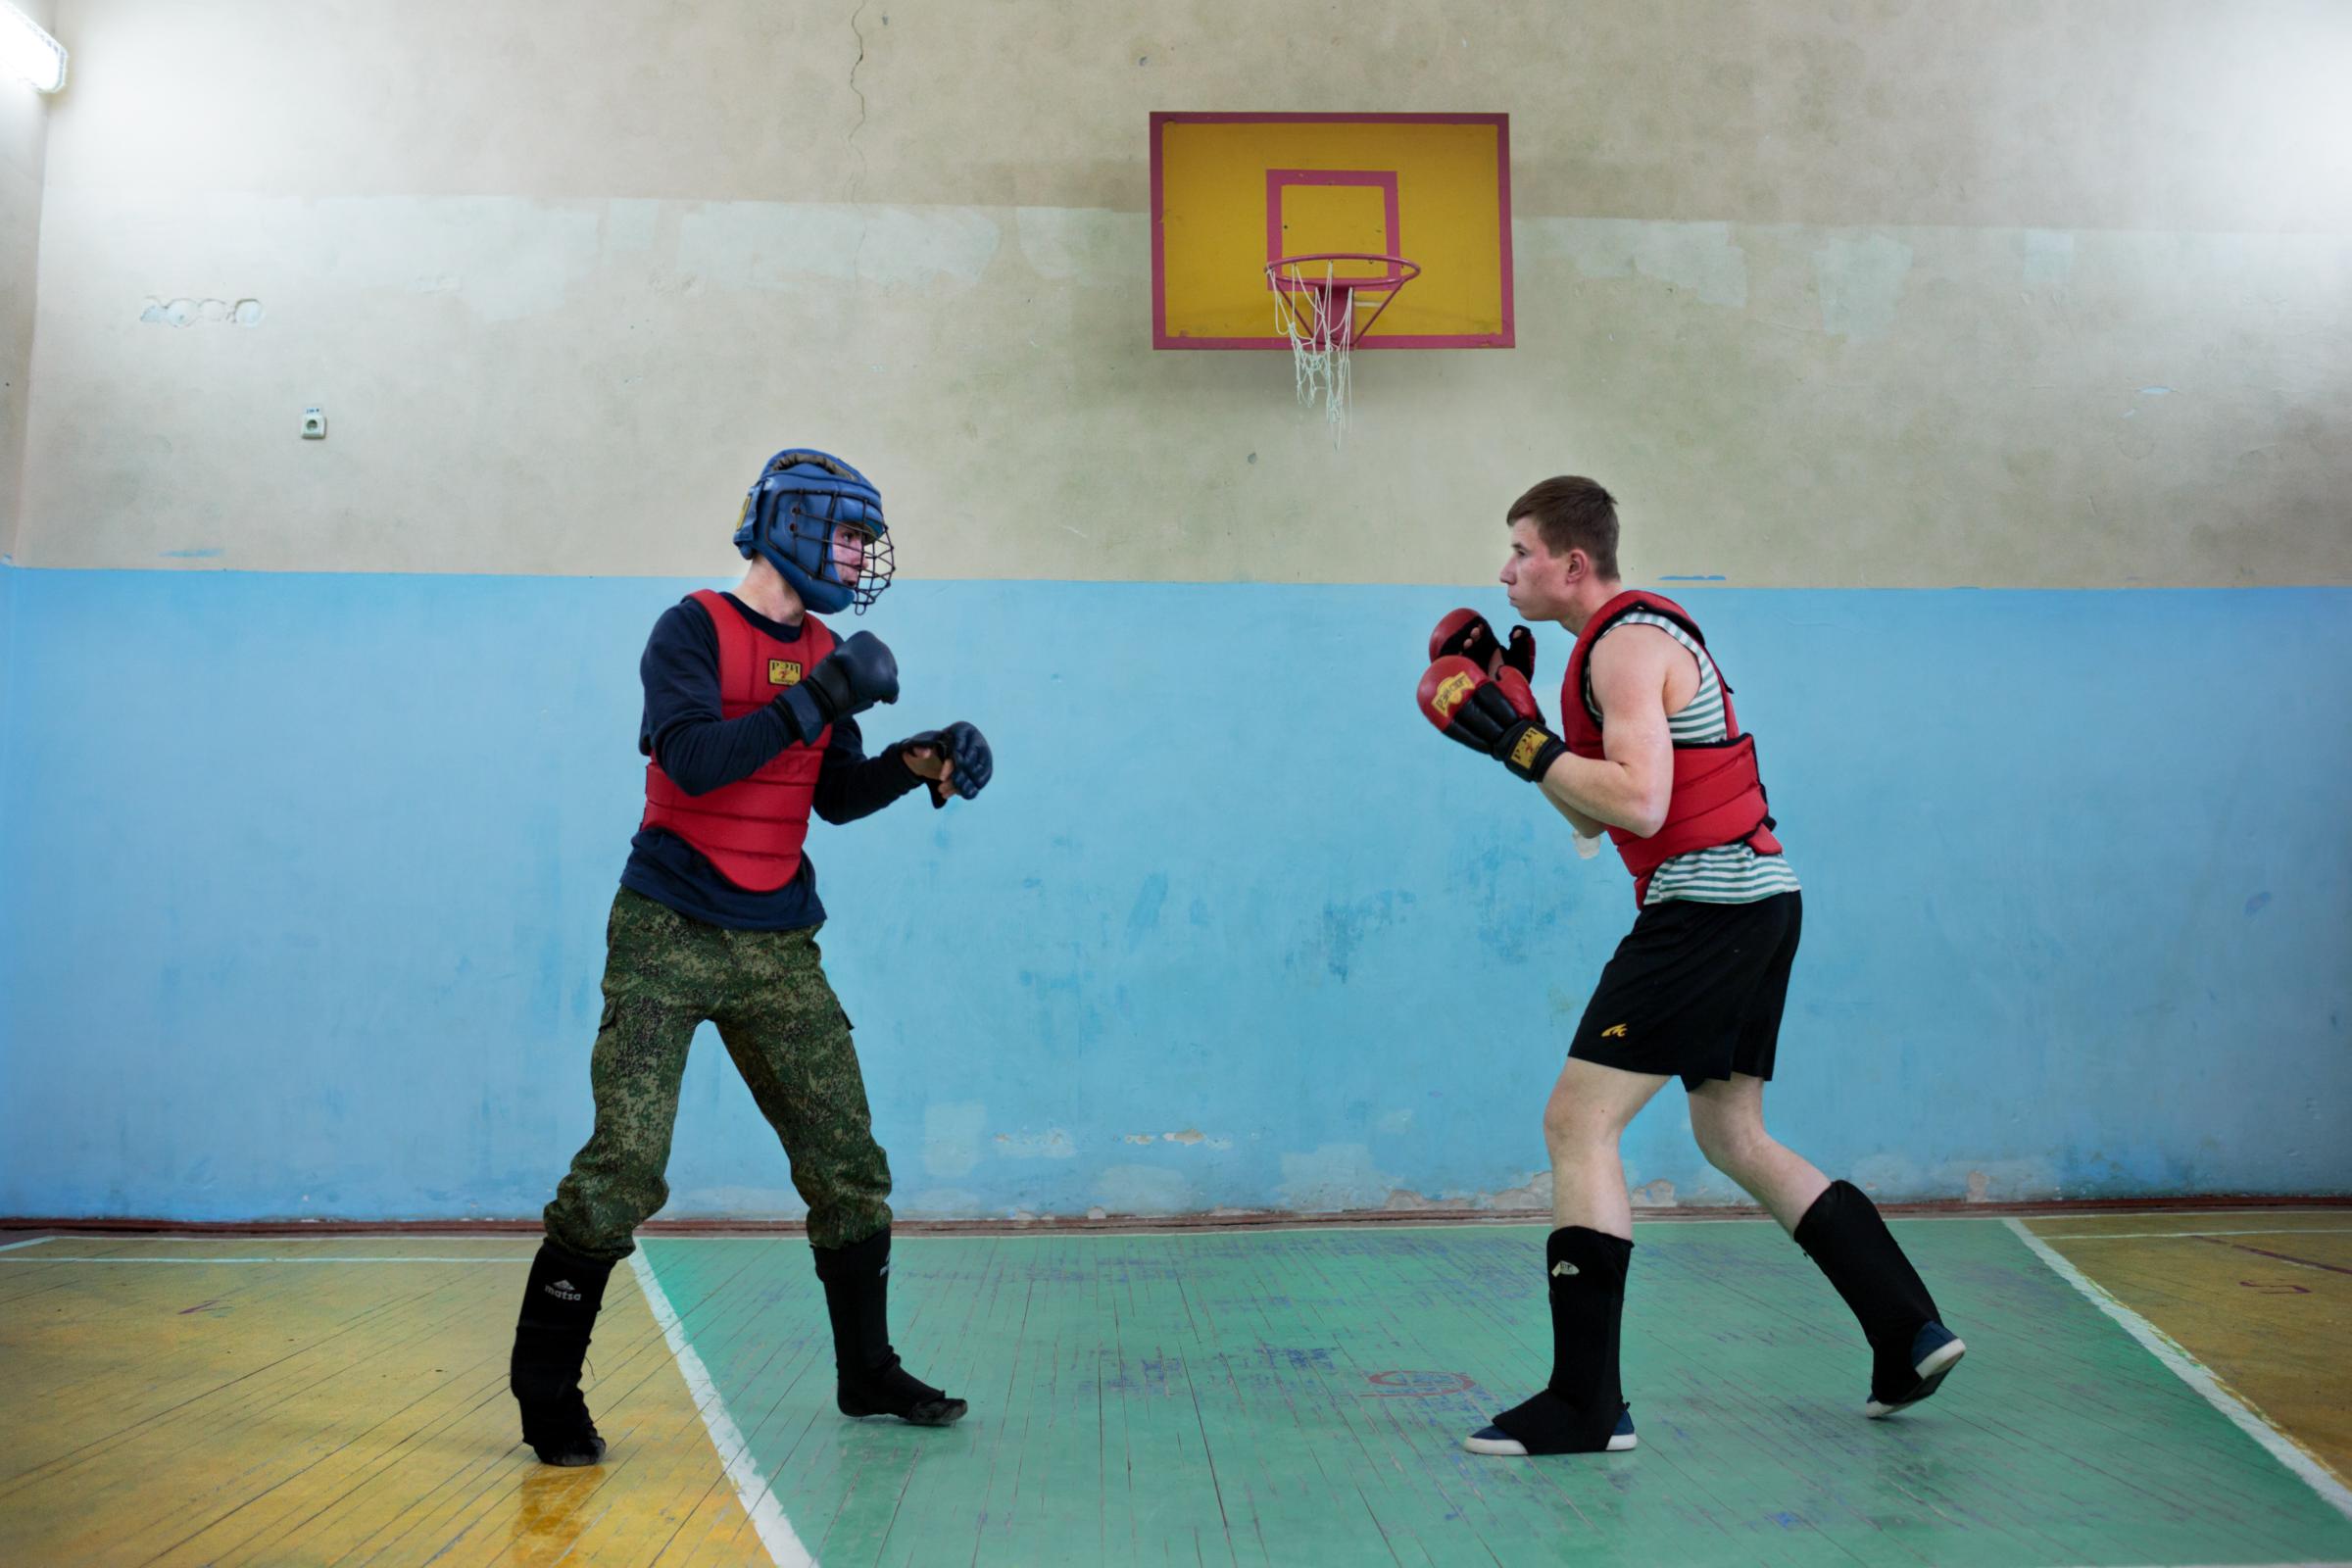 Students practice boxing and martial arts after school at the Diveevo Public School gymnasium on Apr. 6, 2016 in Diveevo, Russia.